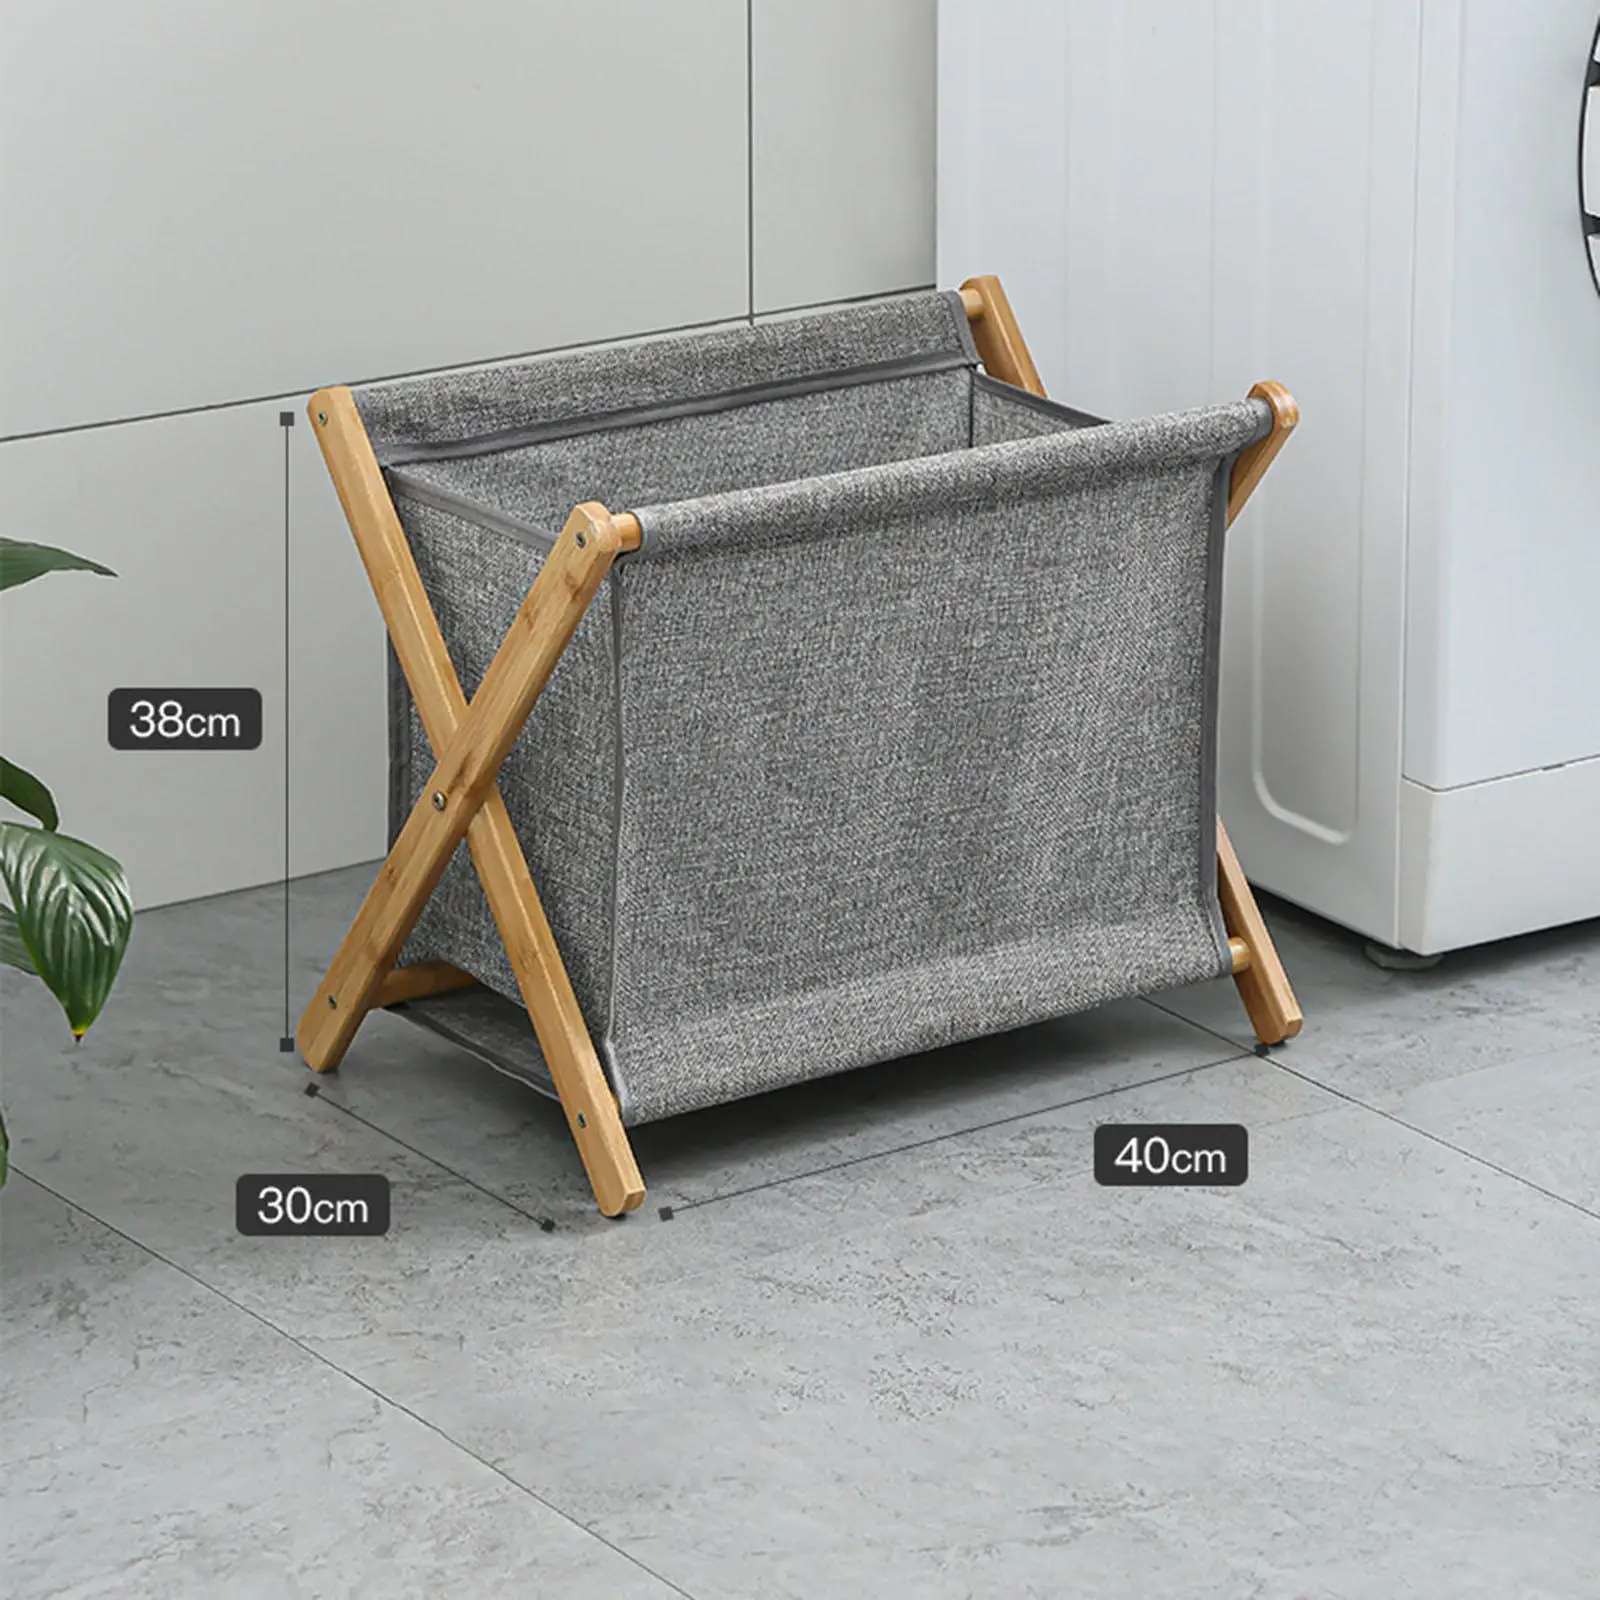 Collapsible x Frame Dirty Clothes Hamper Open Top Design Easy to Fold Move Durable Lightweight Daily Essential Functional